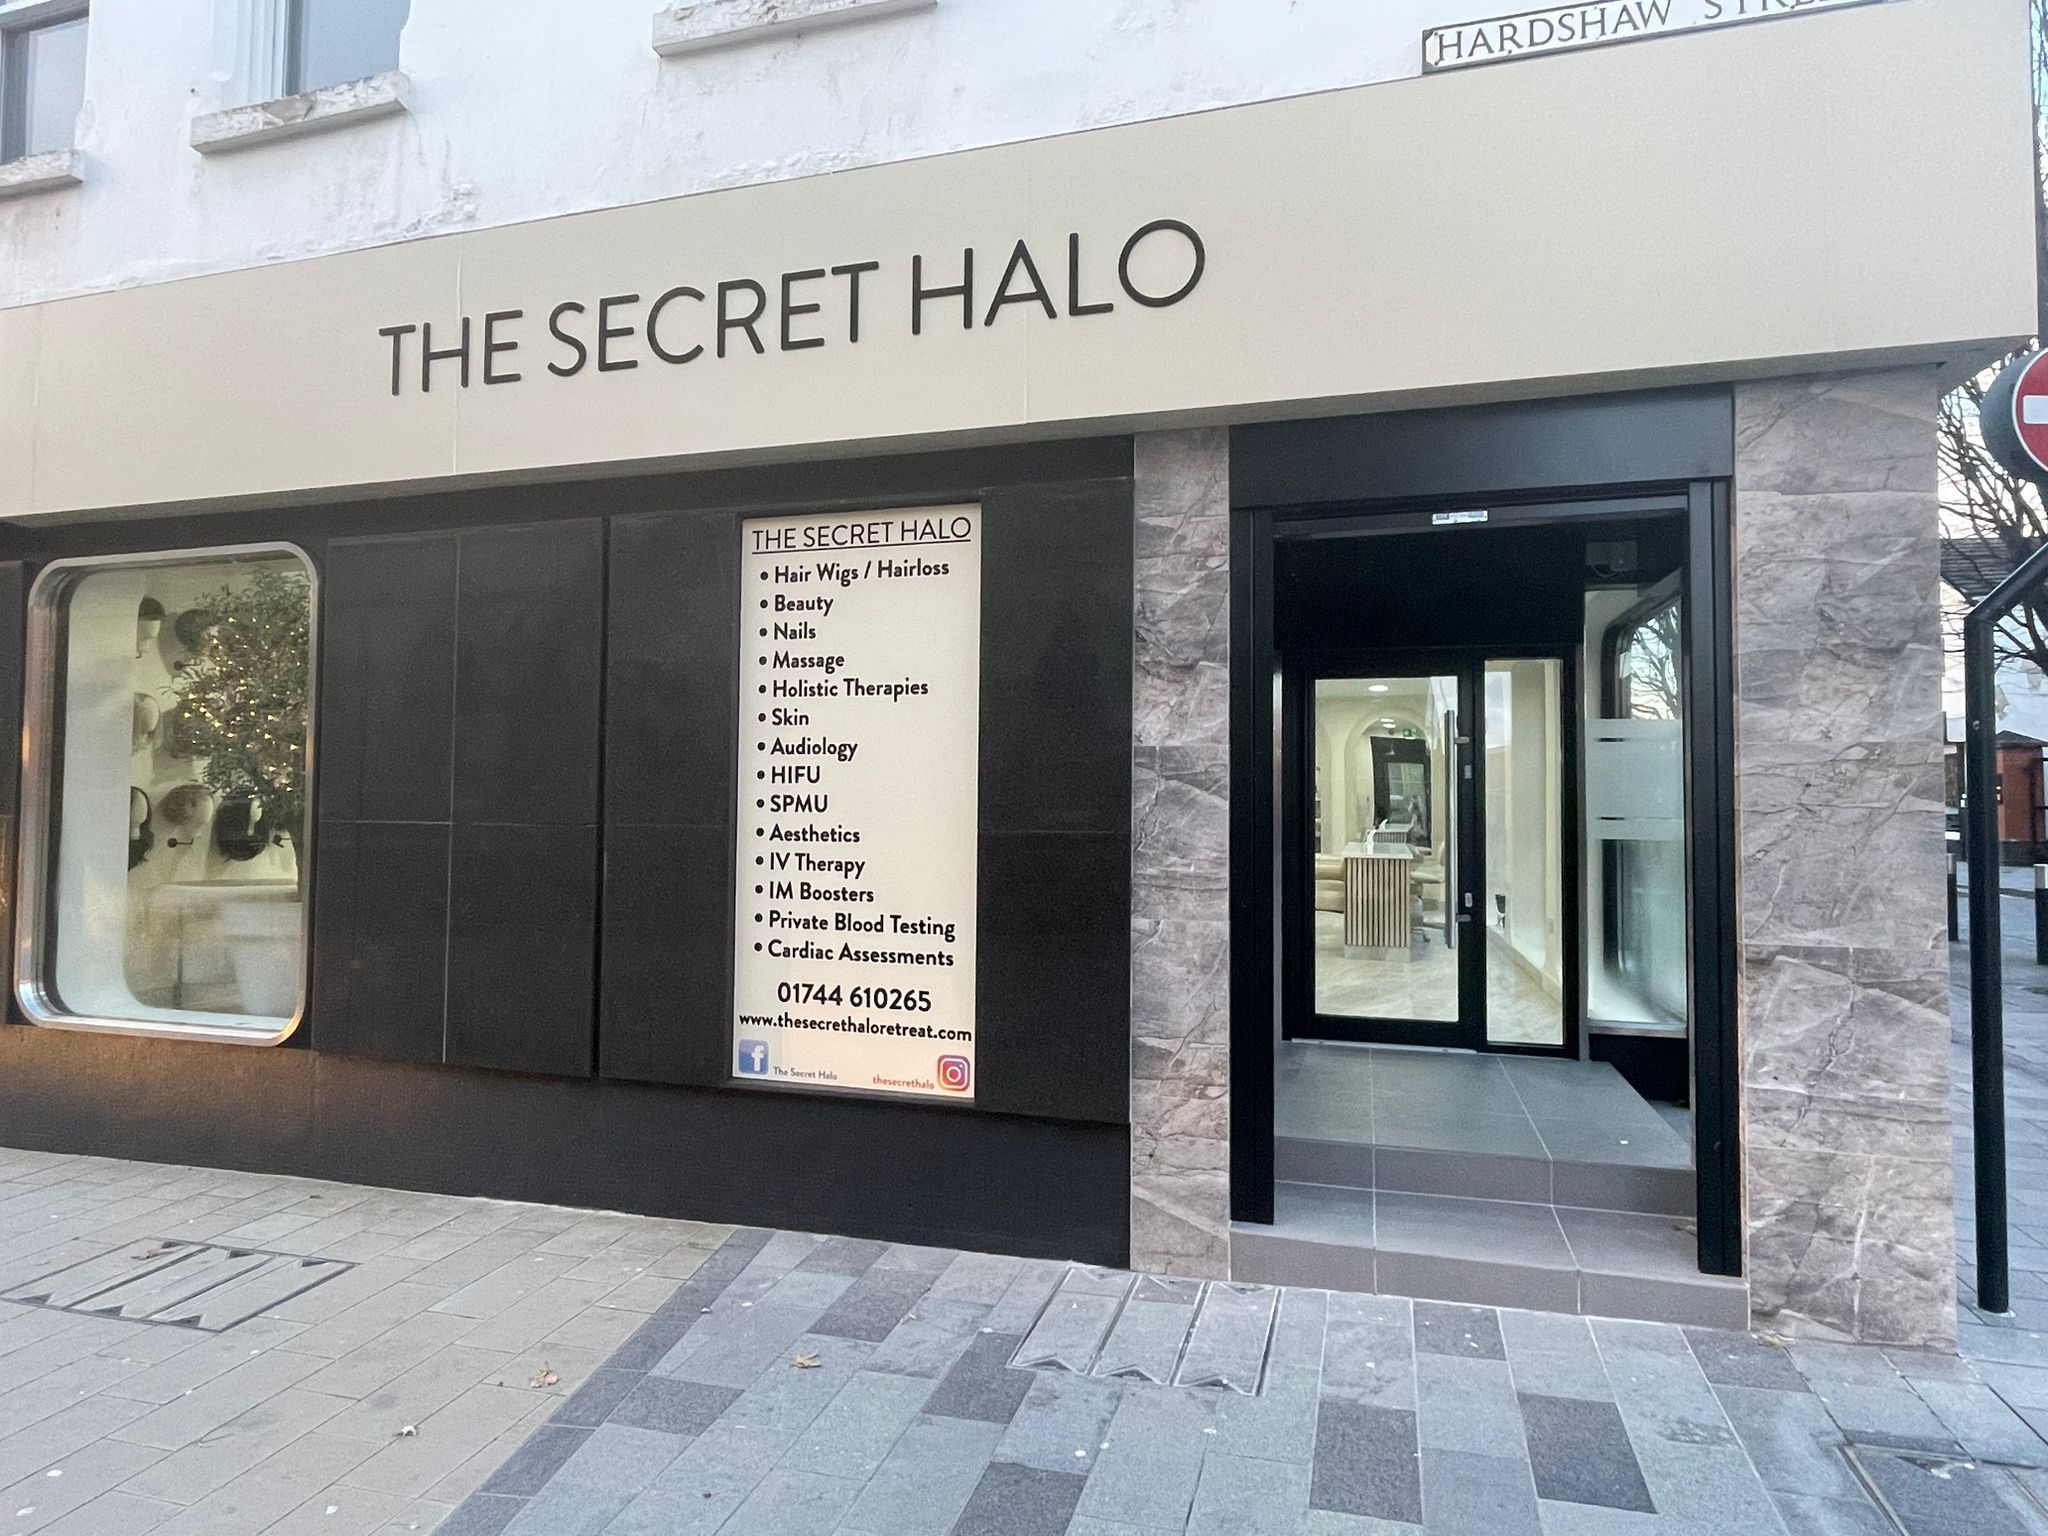 The Secret Halo opend on Hardshaw Street in St Helens town centre in December